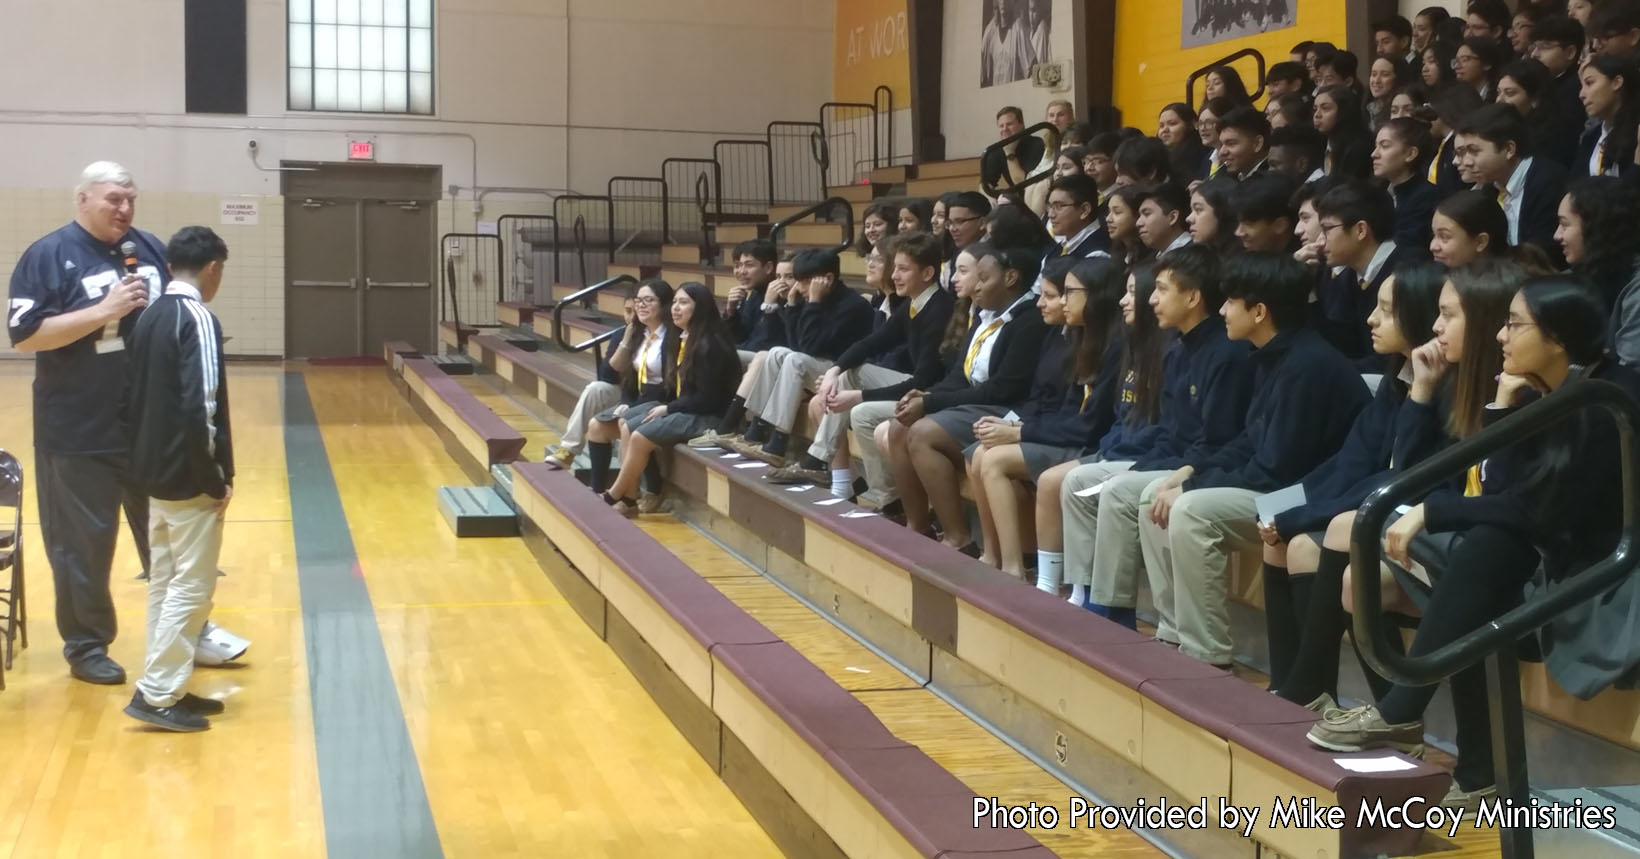 Mike McCoy is giving his faith-based message to a group of young students in one of his many assemblies. The young man standing next to Mike McCoy is participating in the assembly to help the other students get a better understanding.  After this, the students will be given lessons that will help them further in life.